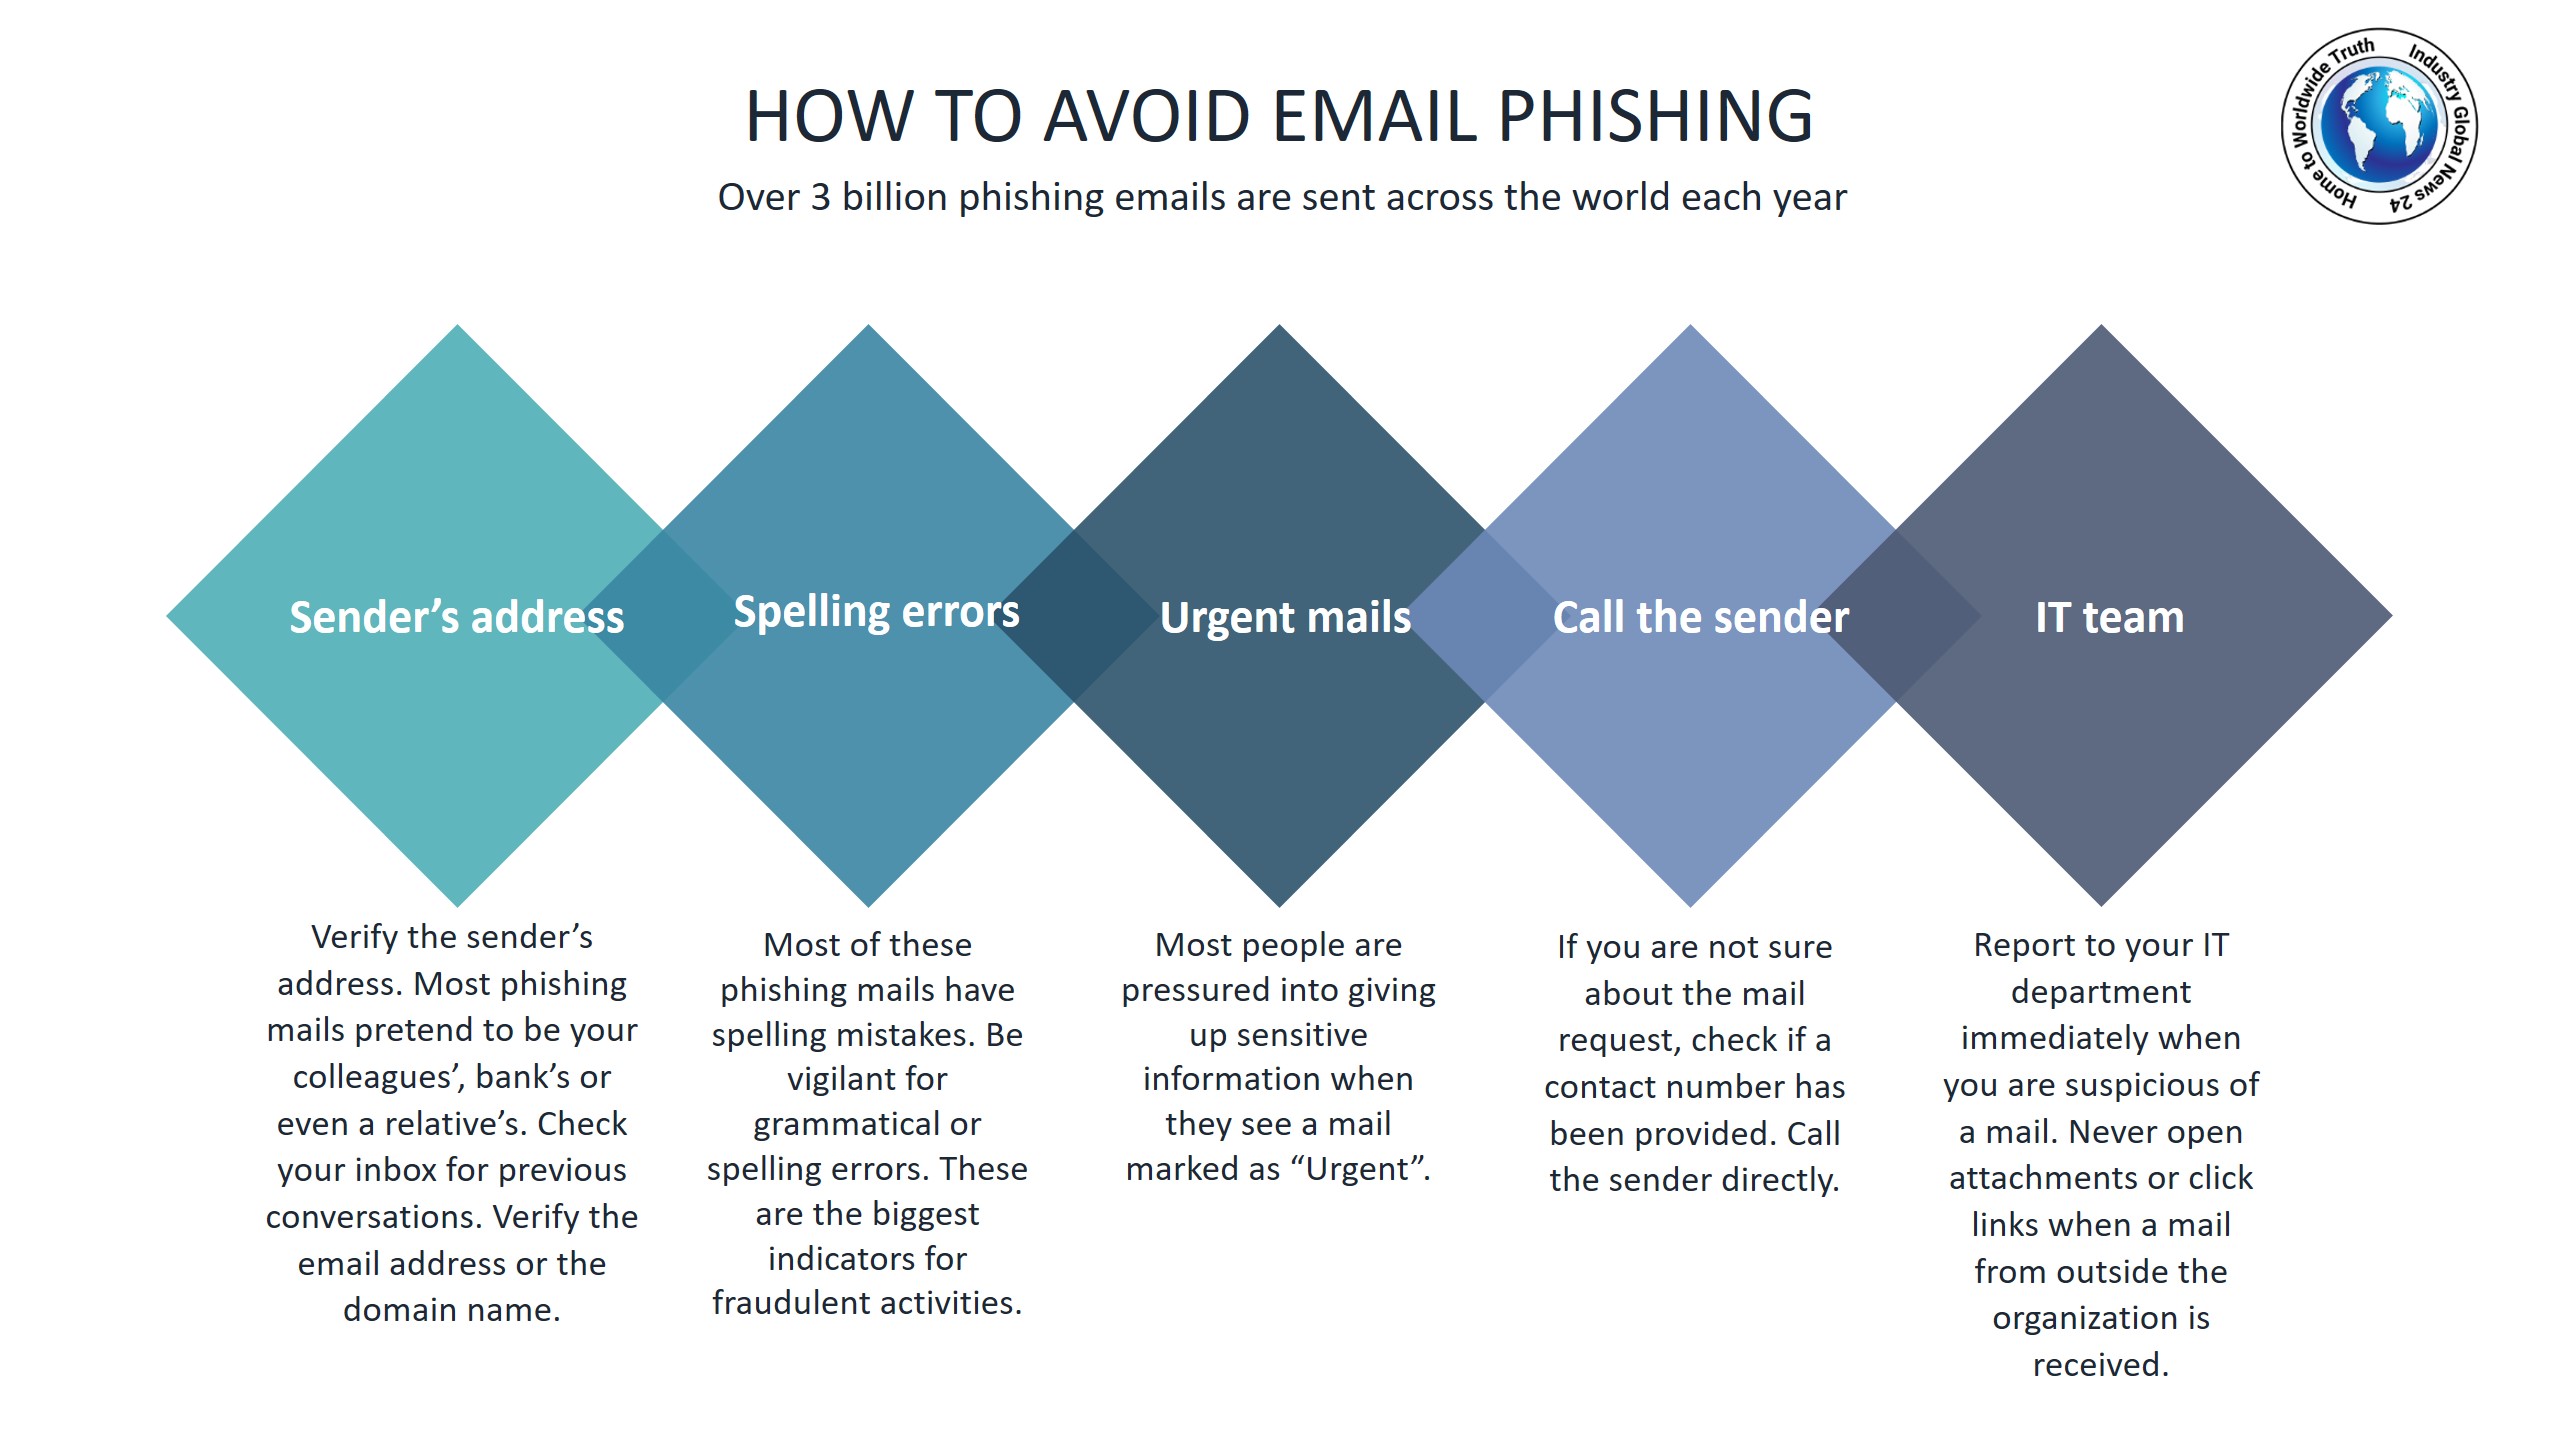 How to avoid email phishing